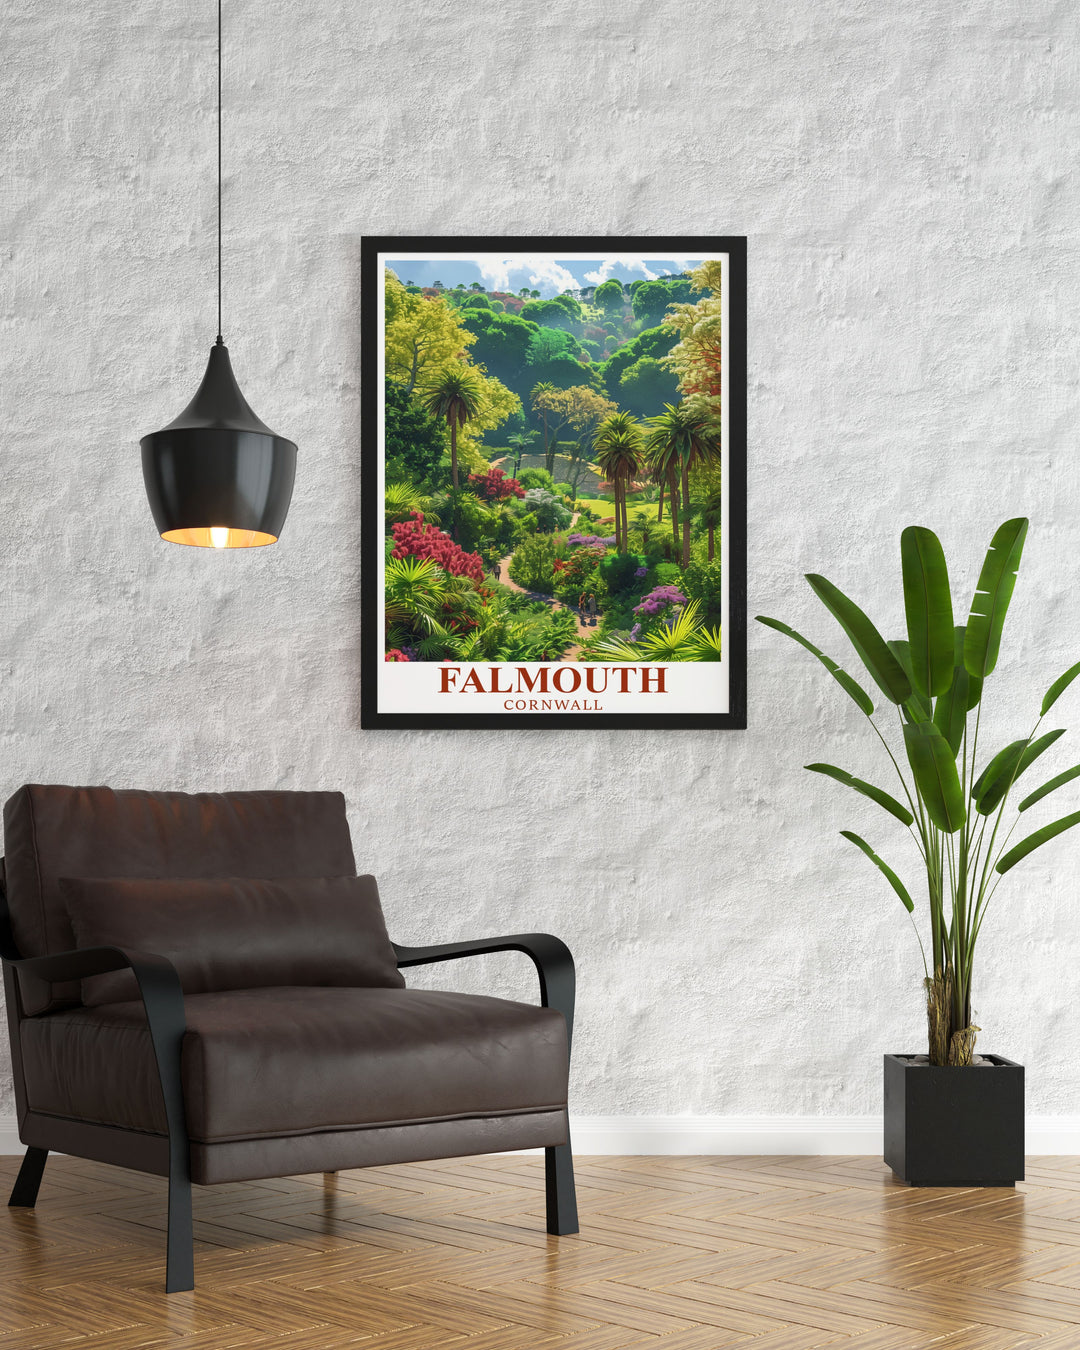 Elegant Trebah Garden poster featuring the picturesque garden in Falmouth, Cornwall. This travel print brings the natural beauty of Cornwall into your home, making it a standout piece in your decor.